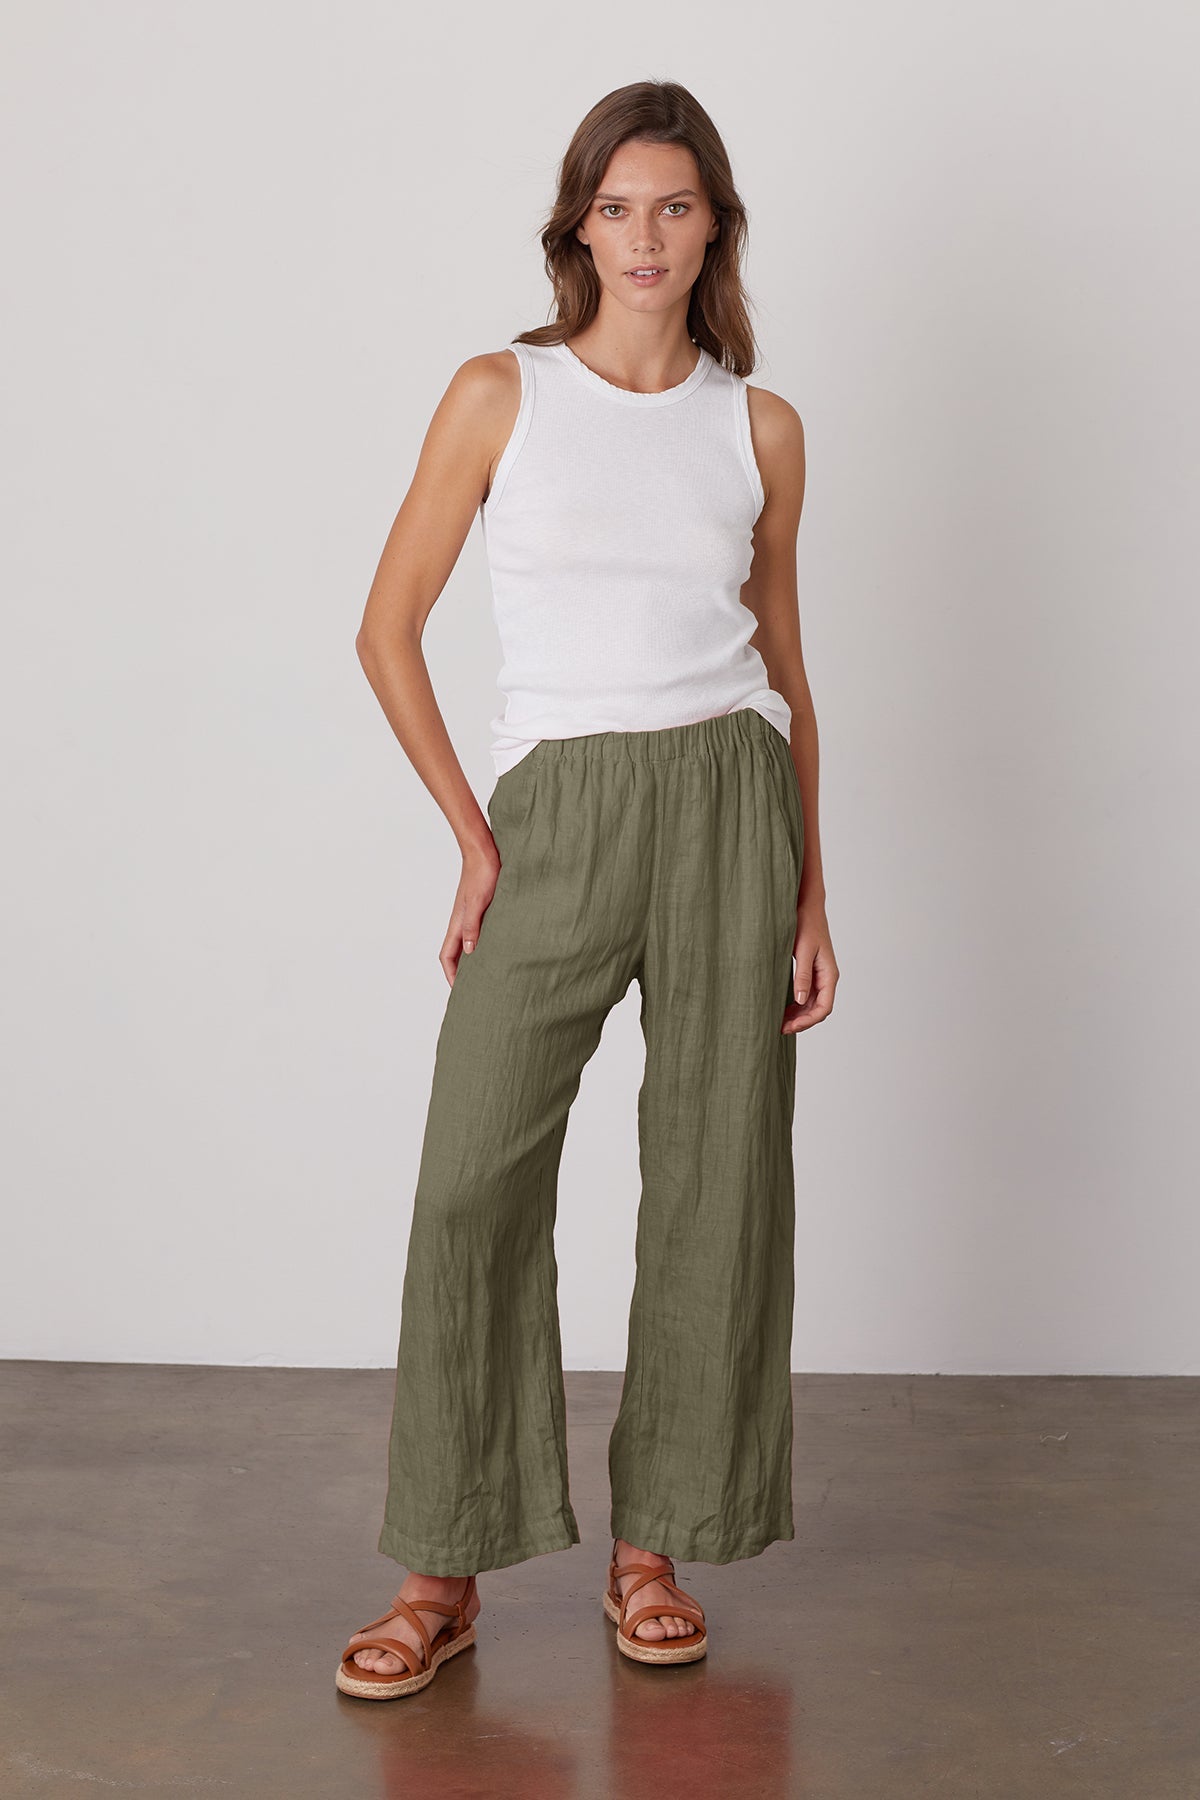   Lola linen pant in olive green with Maxie tank in white. 